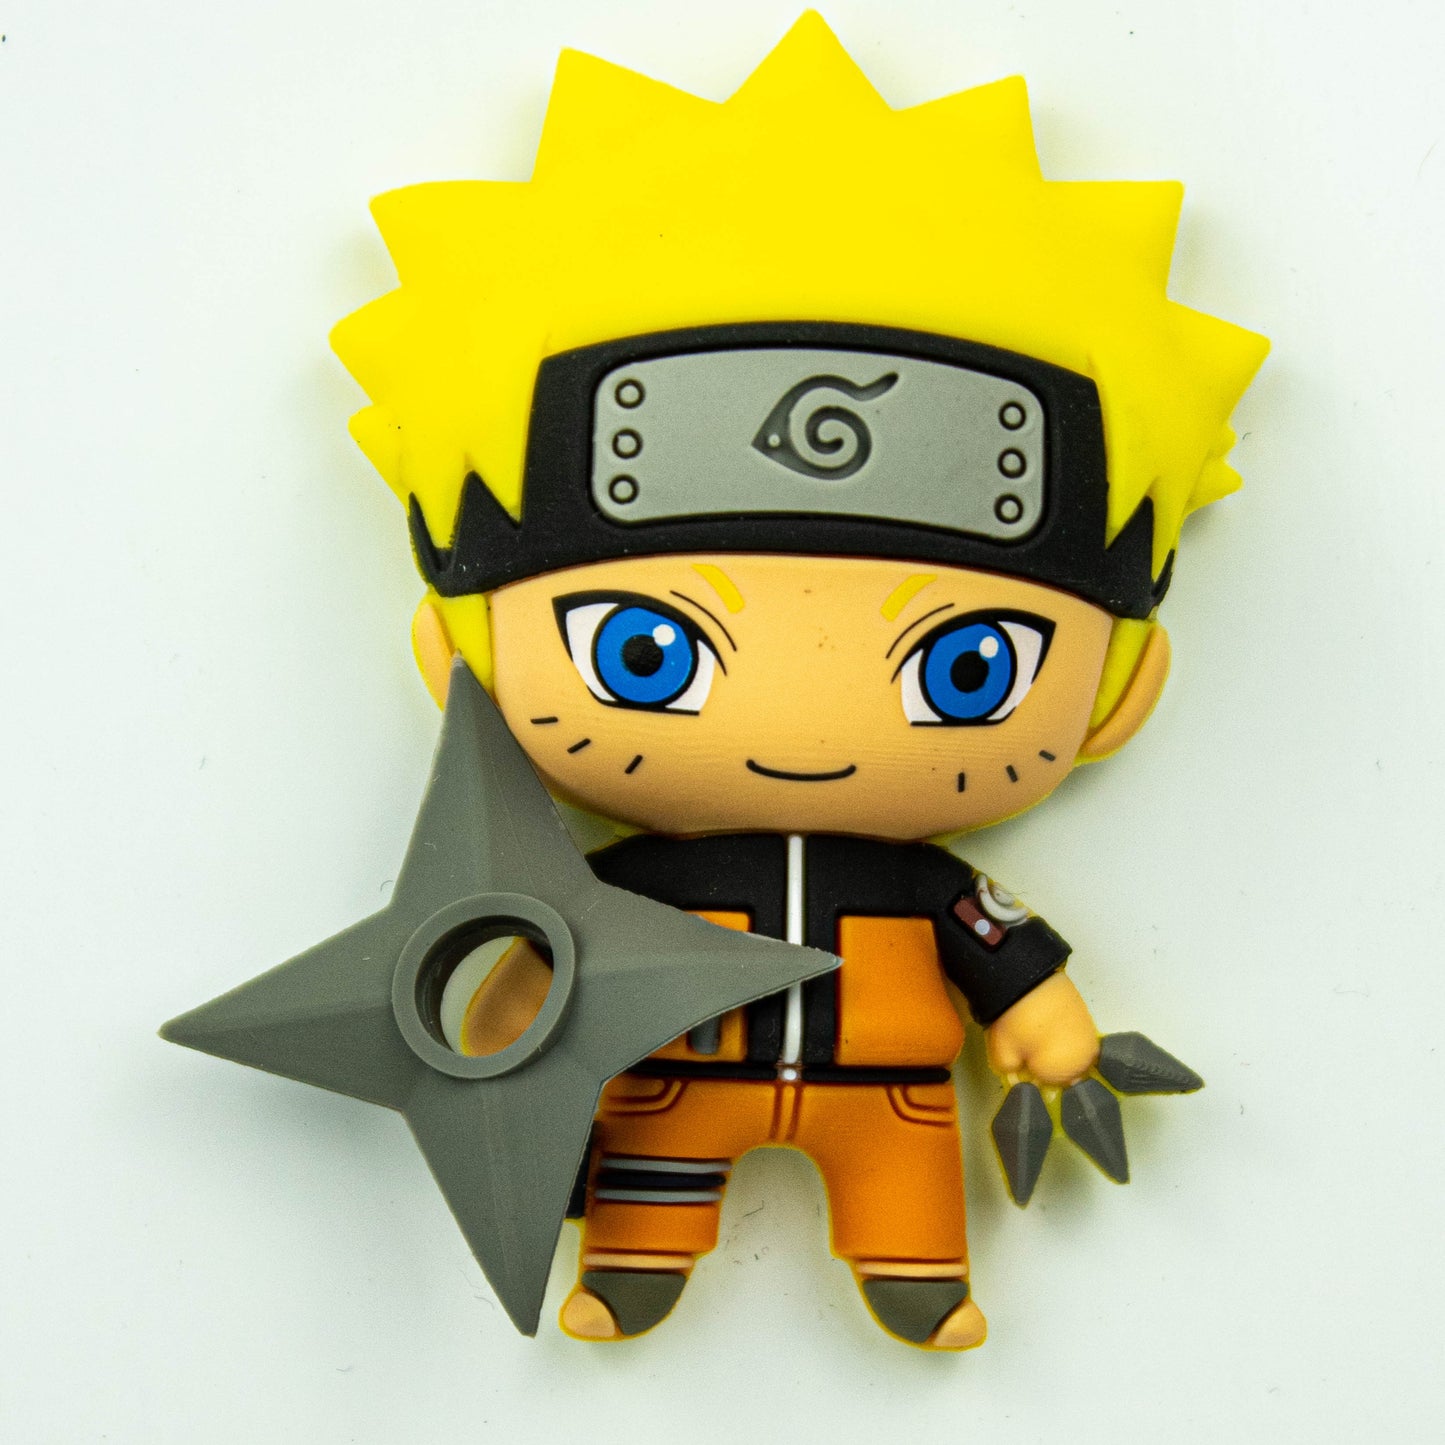 Naruto (With Throwing Star) 3D Foam Magnet